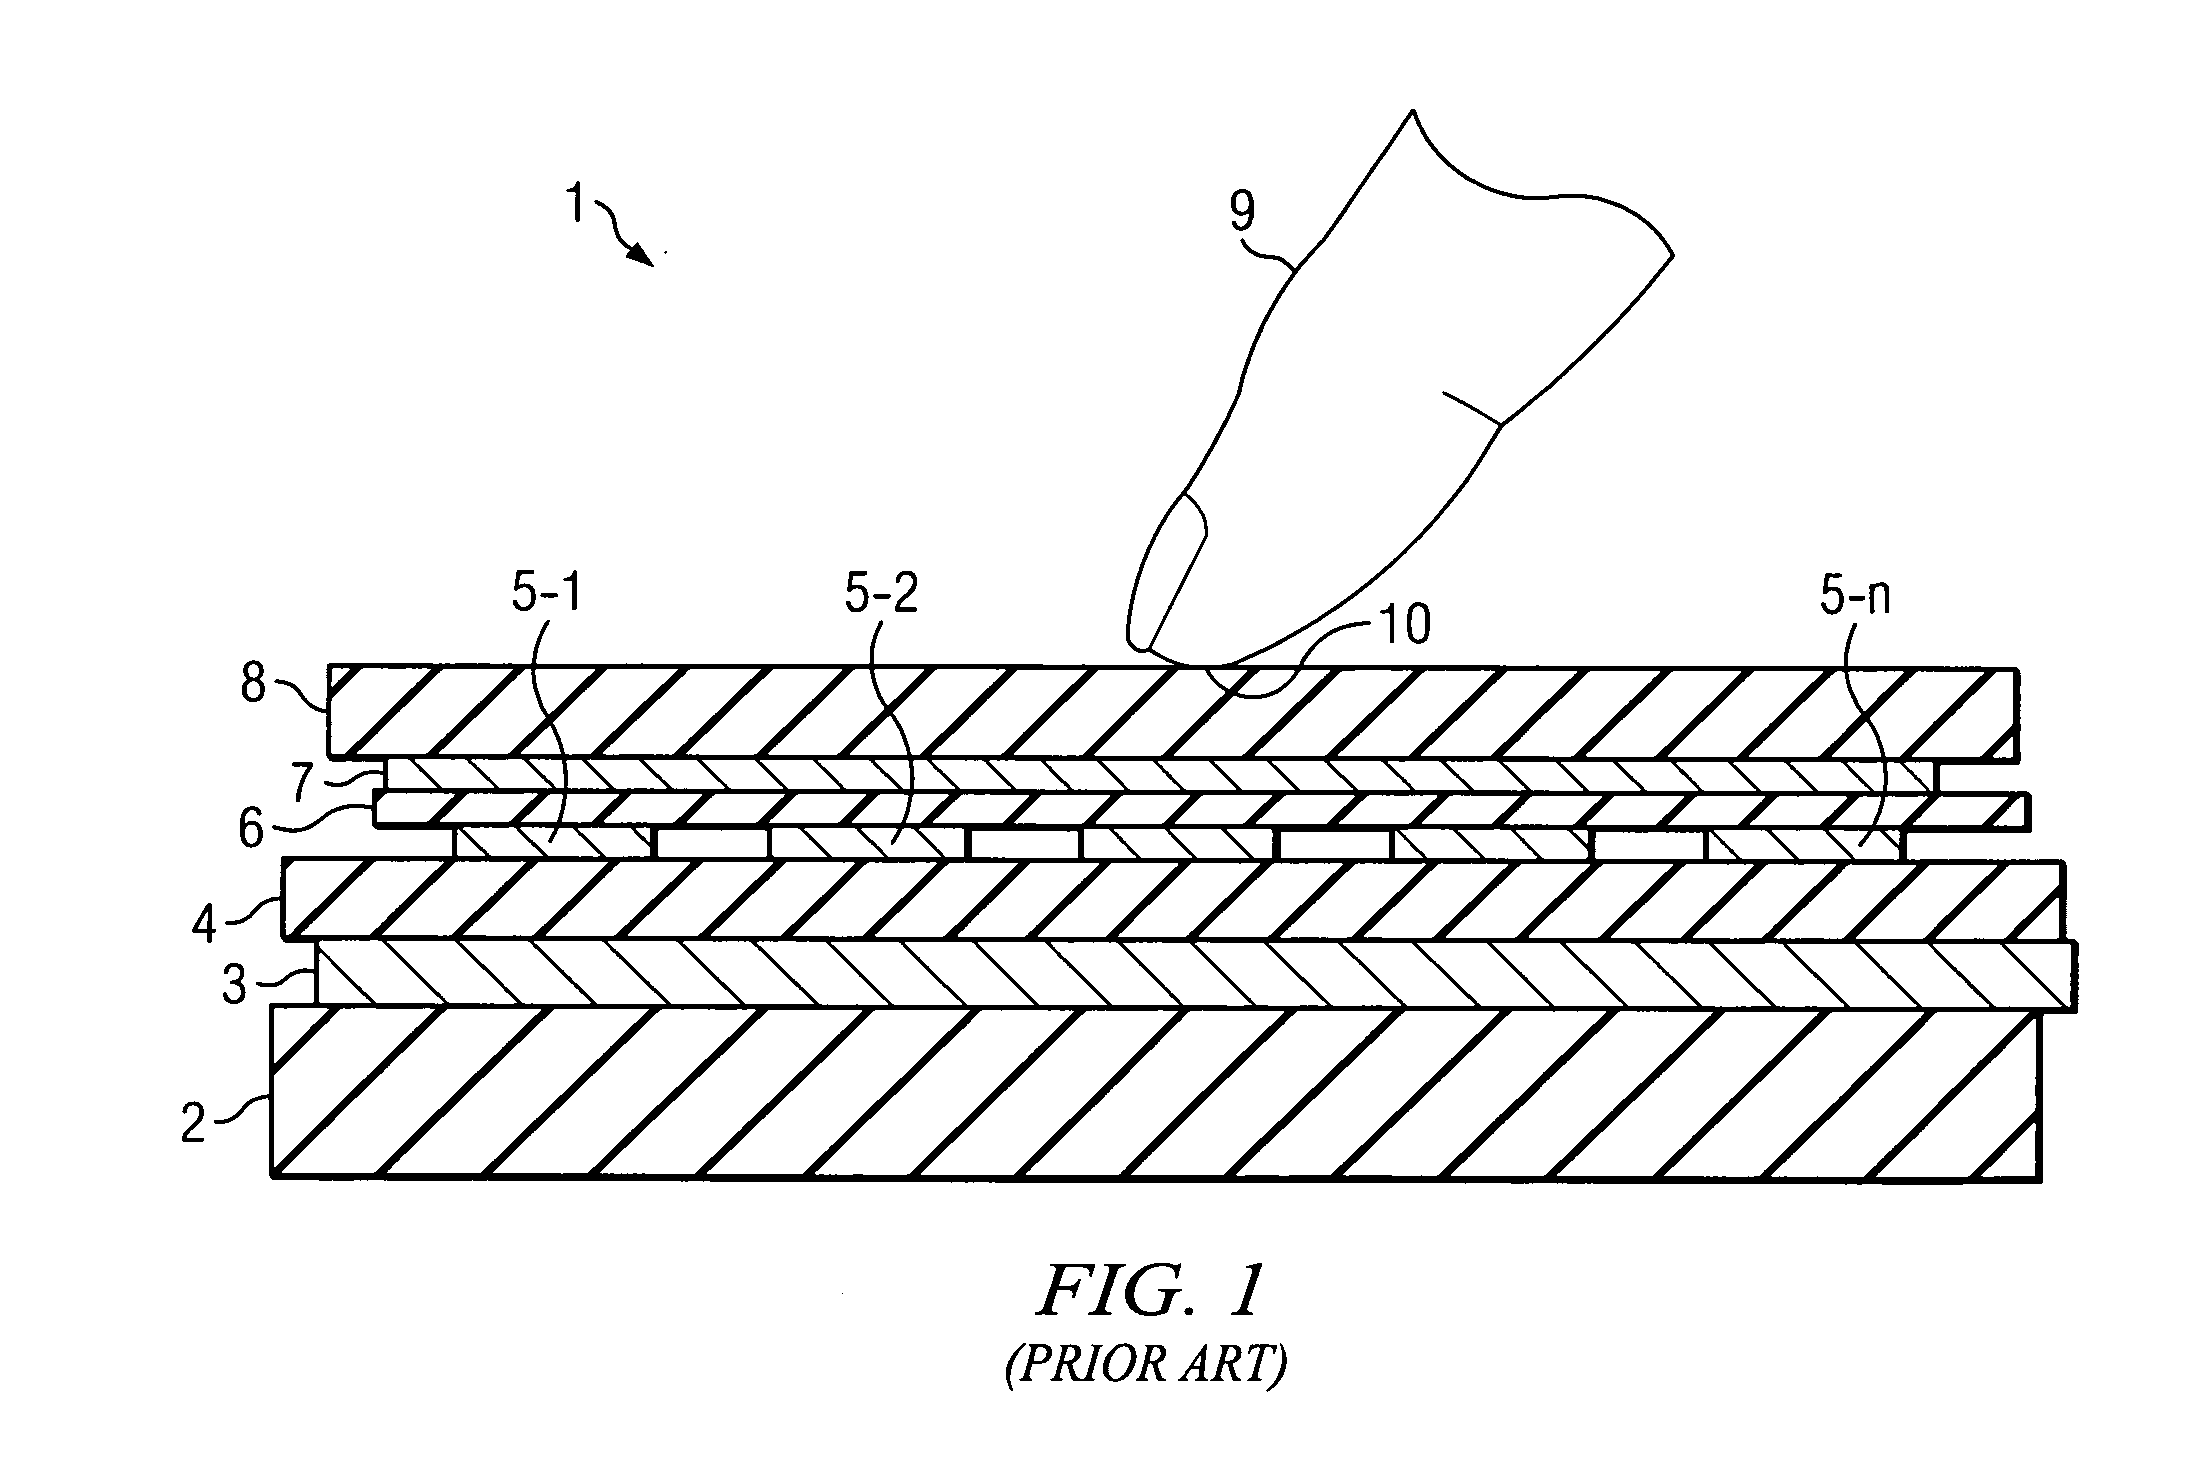 Touch-sensitive interface and method using orthogonal signaling